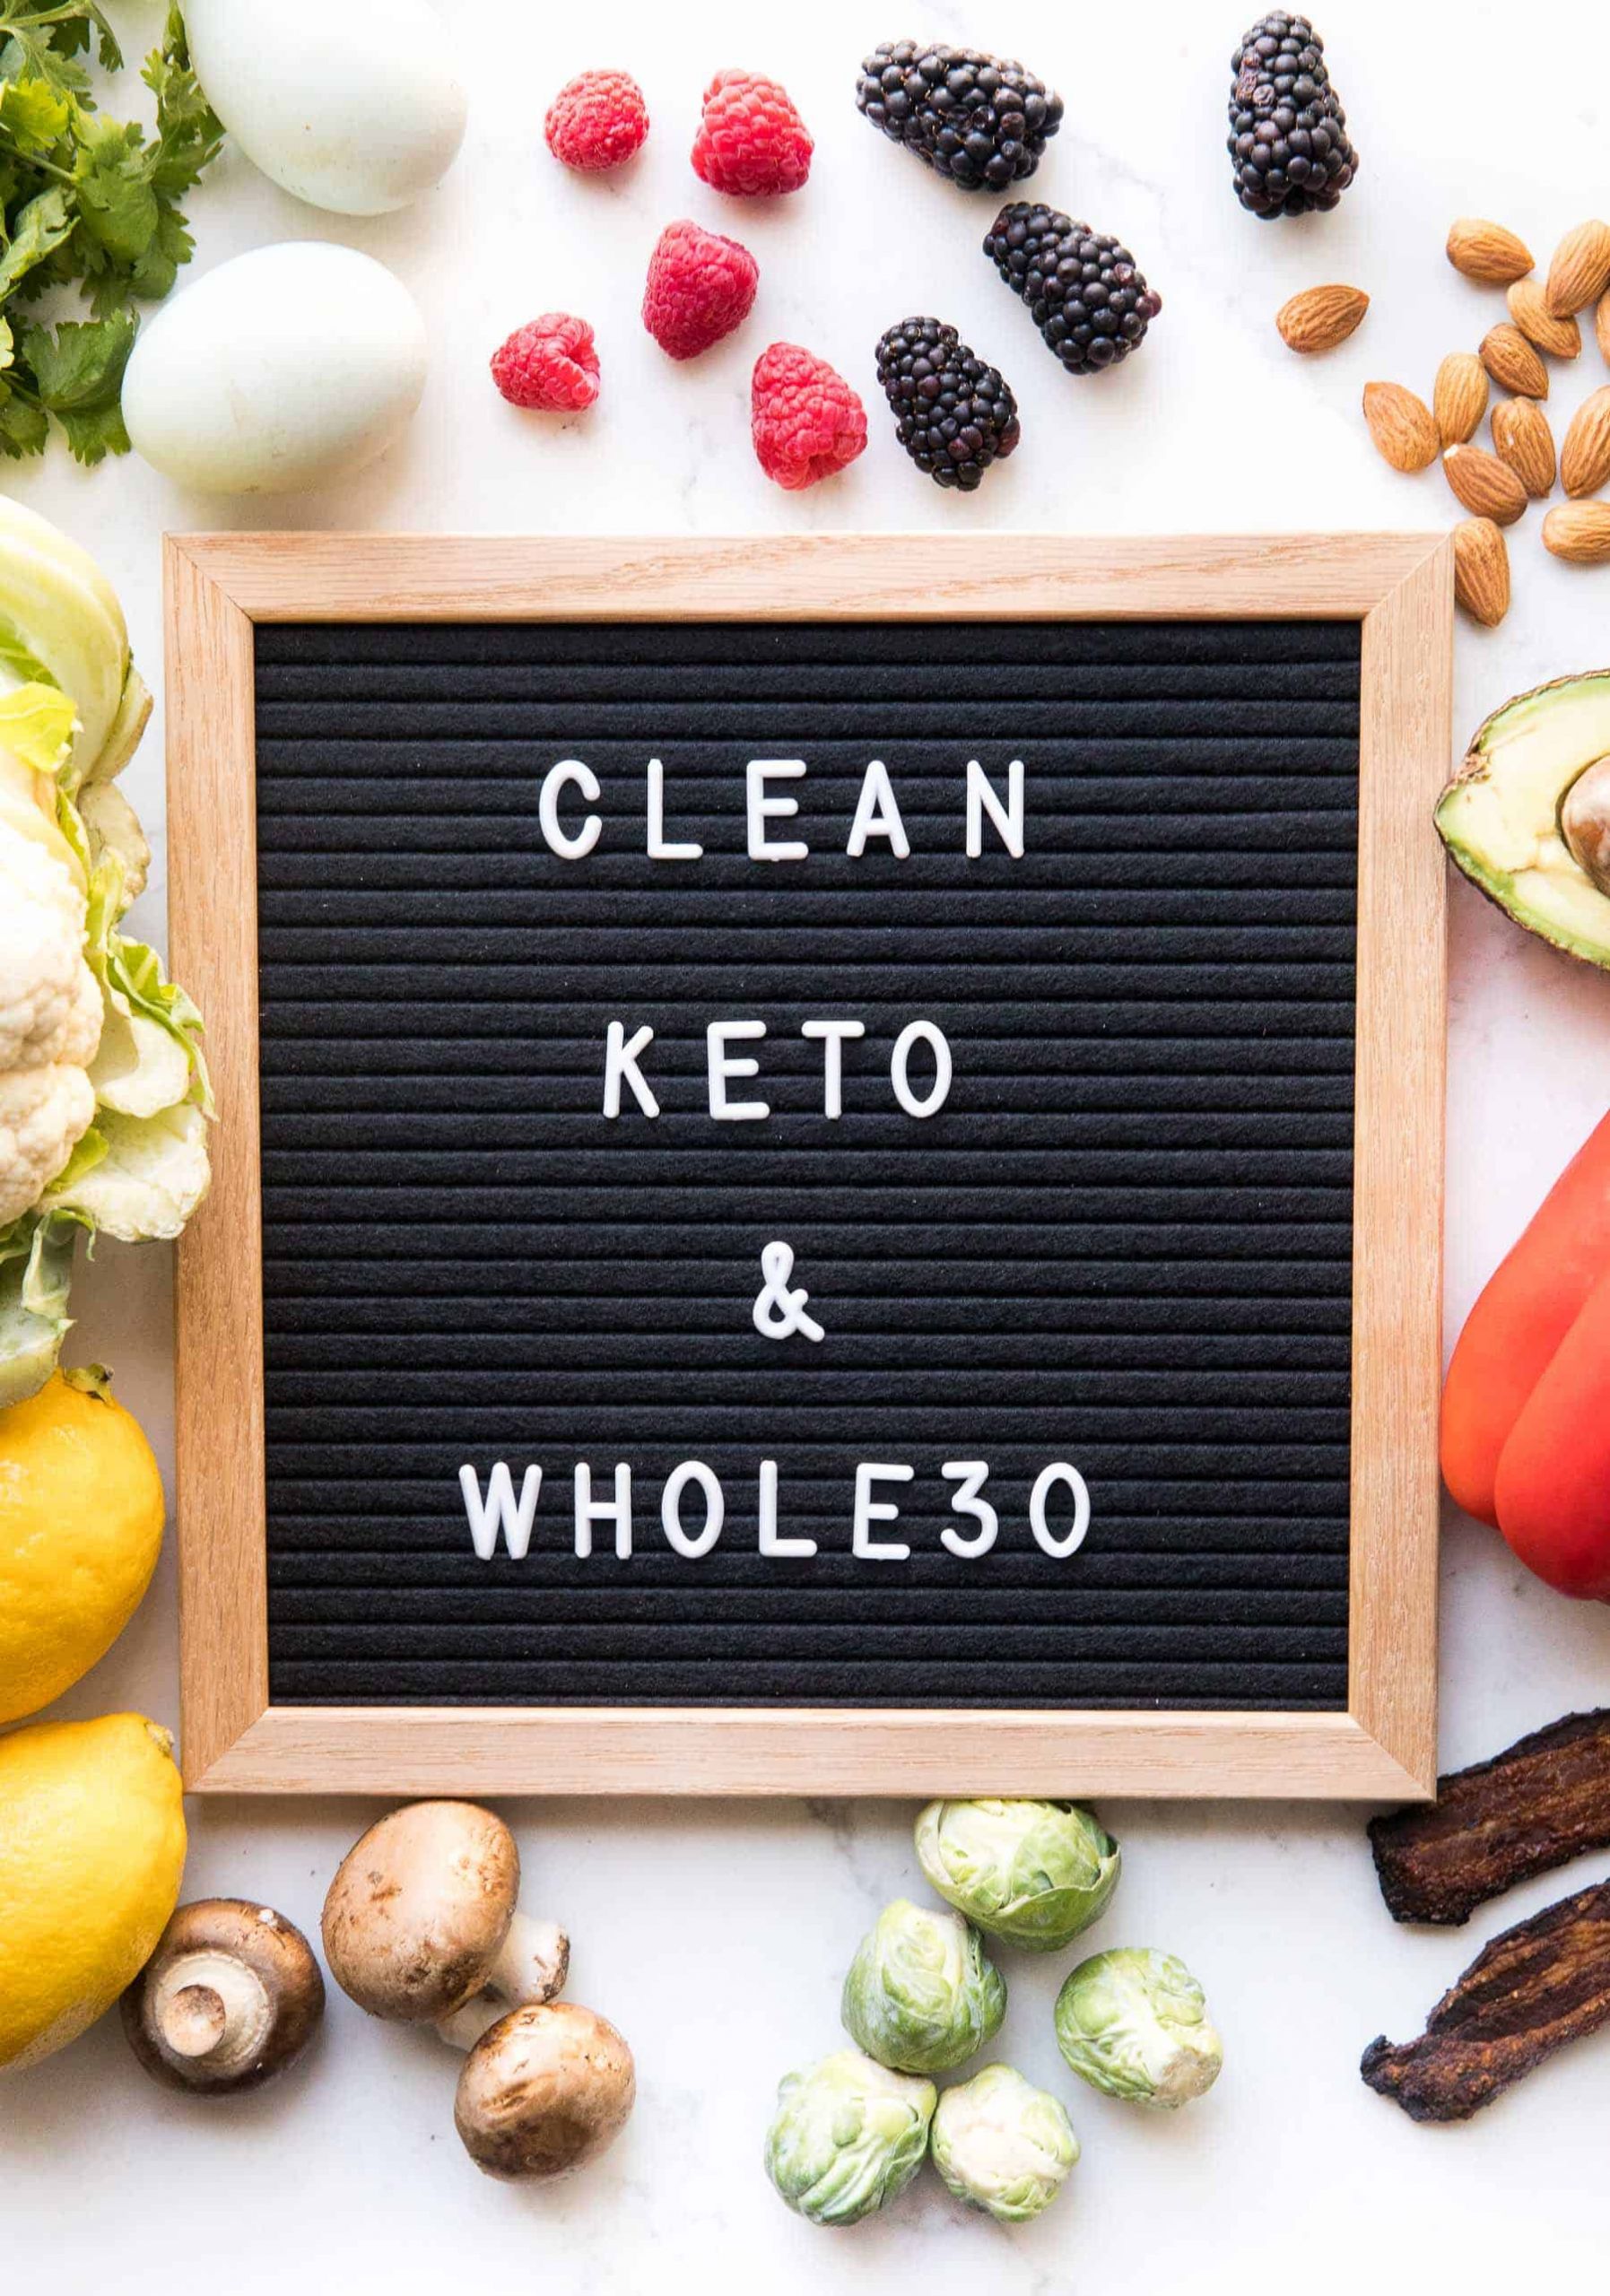 Clean Keto Vegetables The Clean Keto Whole30 Foods I Eat Tastes Lovely